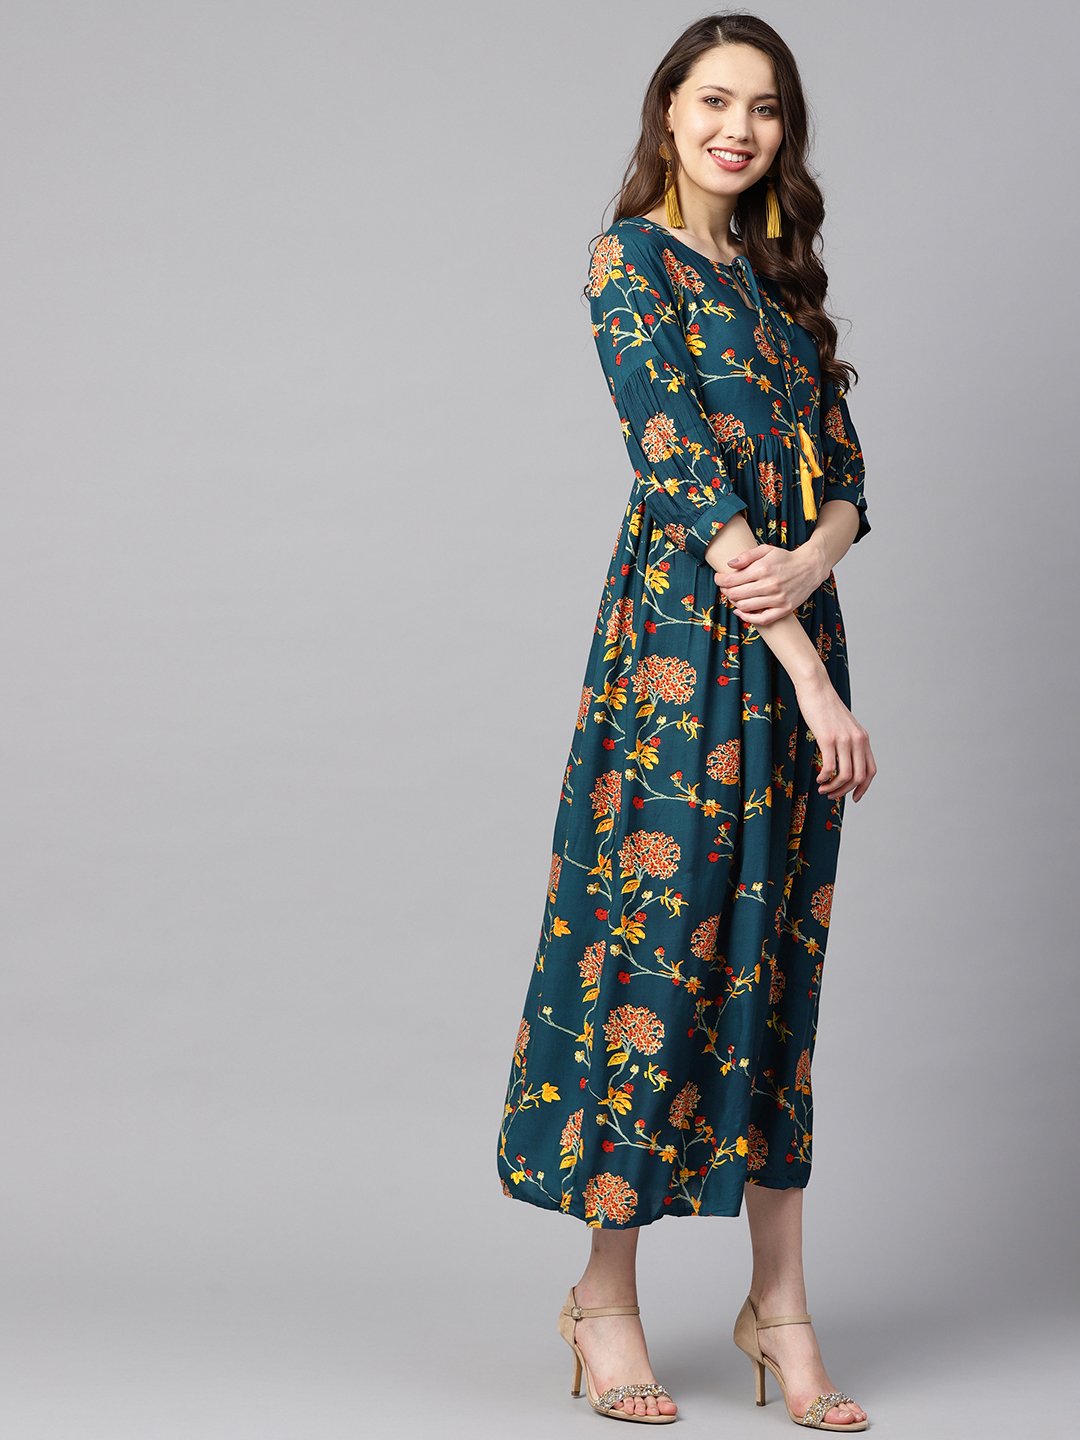 Women's Dark Teal Turquiose Floral Printed Maxi Dress With Key Hole Neckline & 3/4 Sleeves - Nayo Clothing